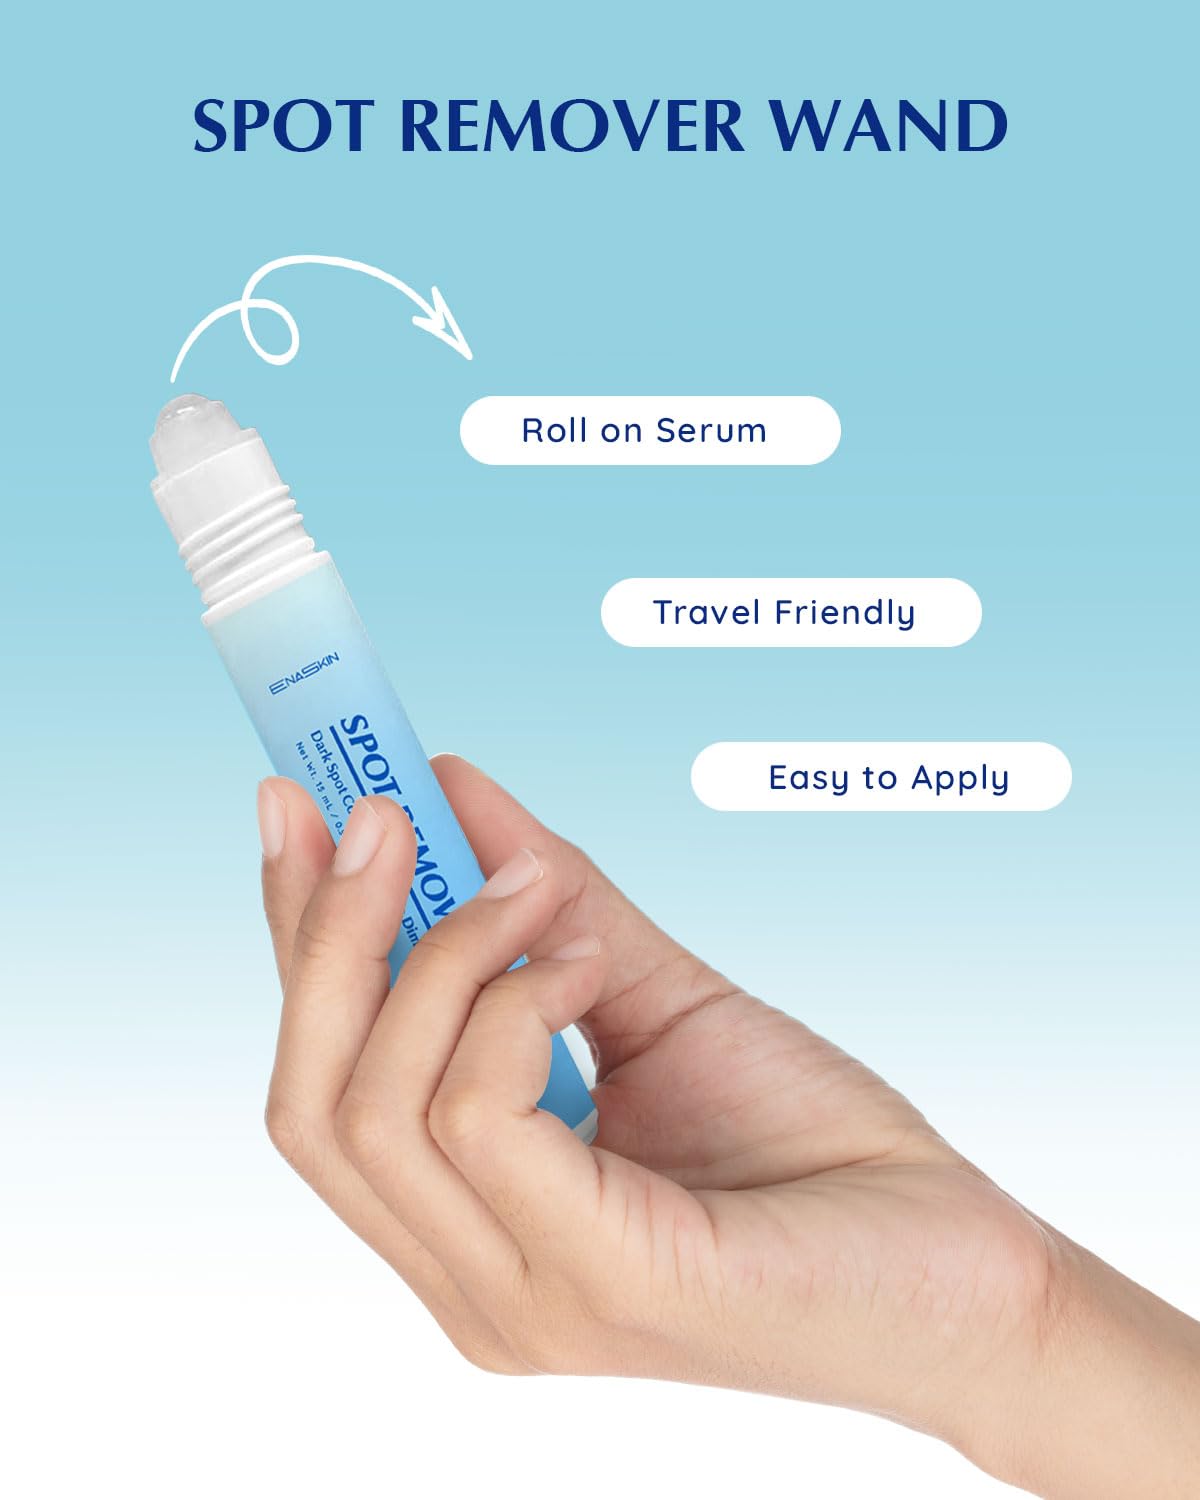 Spot Remover Wand